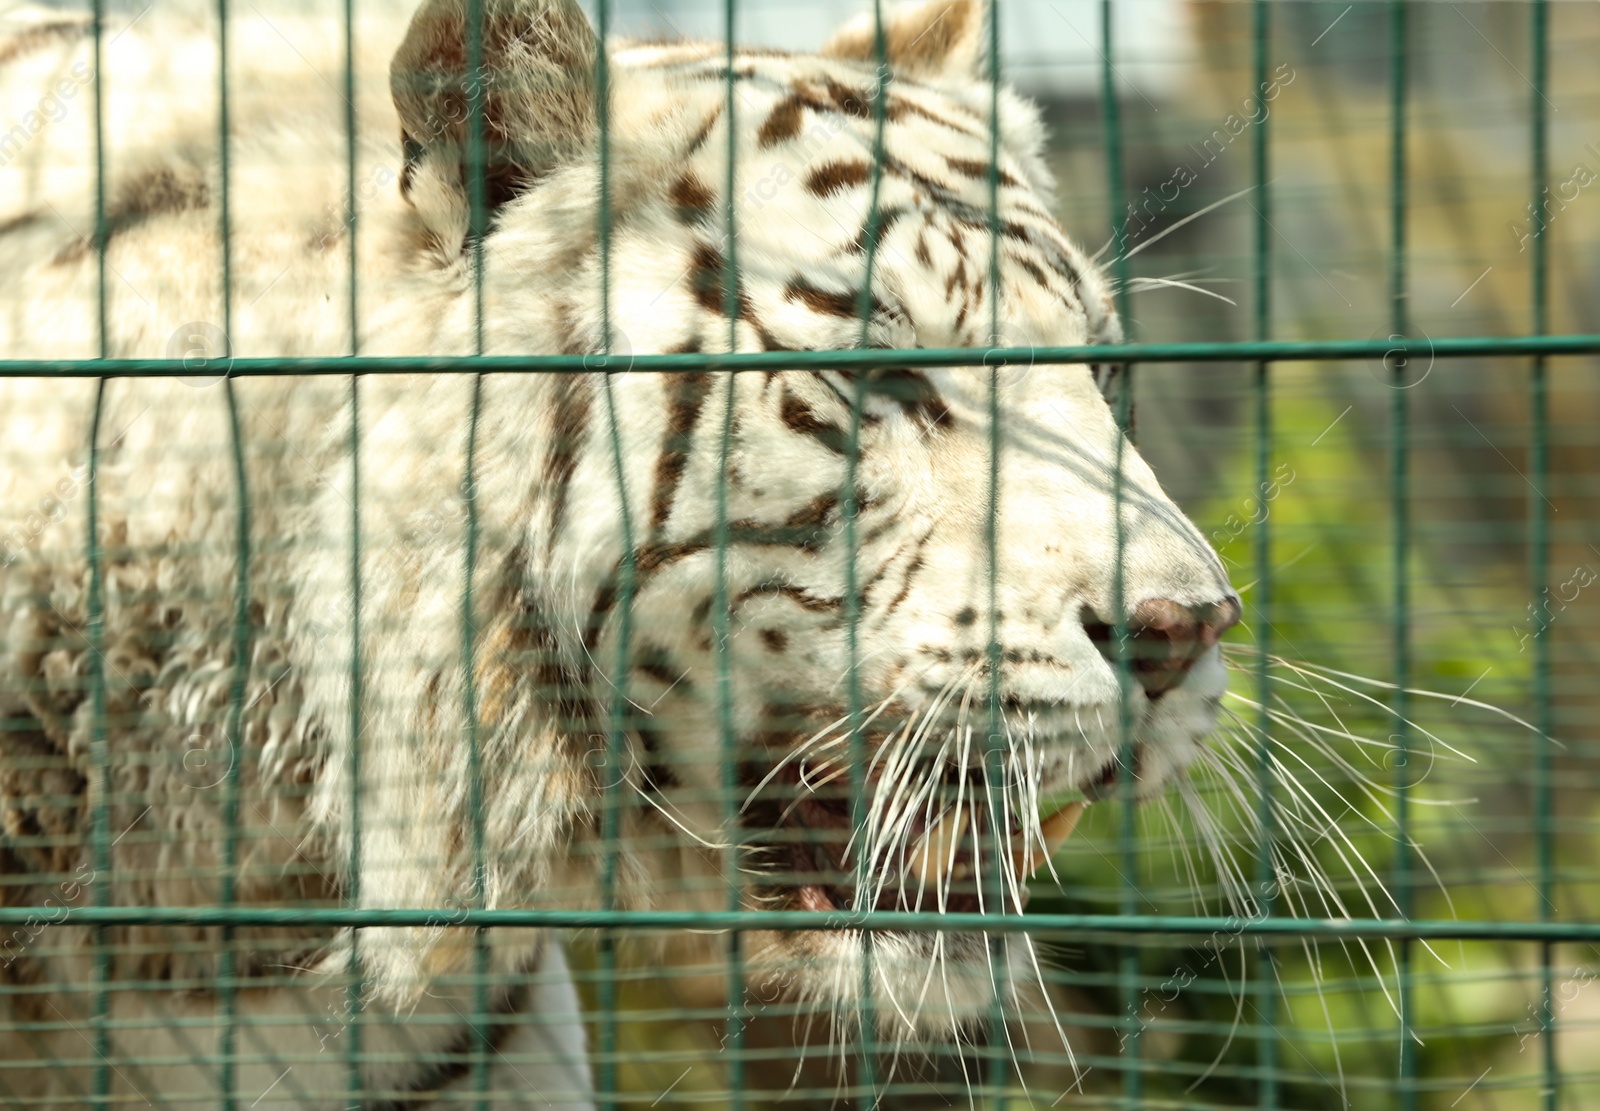 Photo of Closeup view of Bengal white tiger at enclosure in zoo